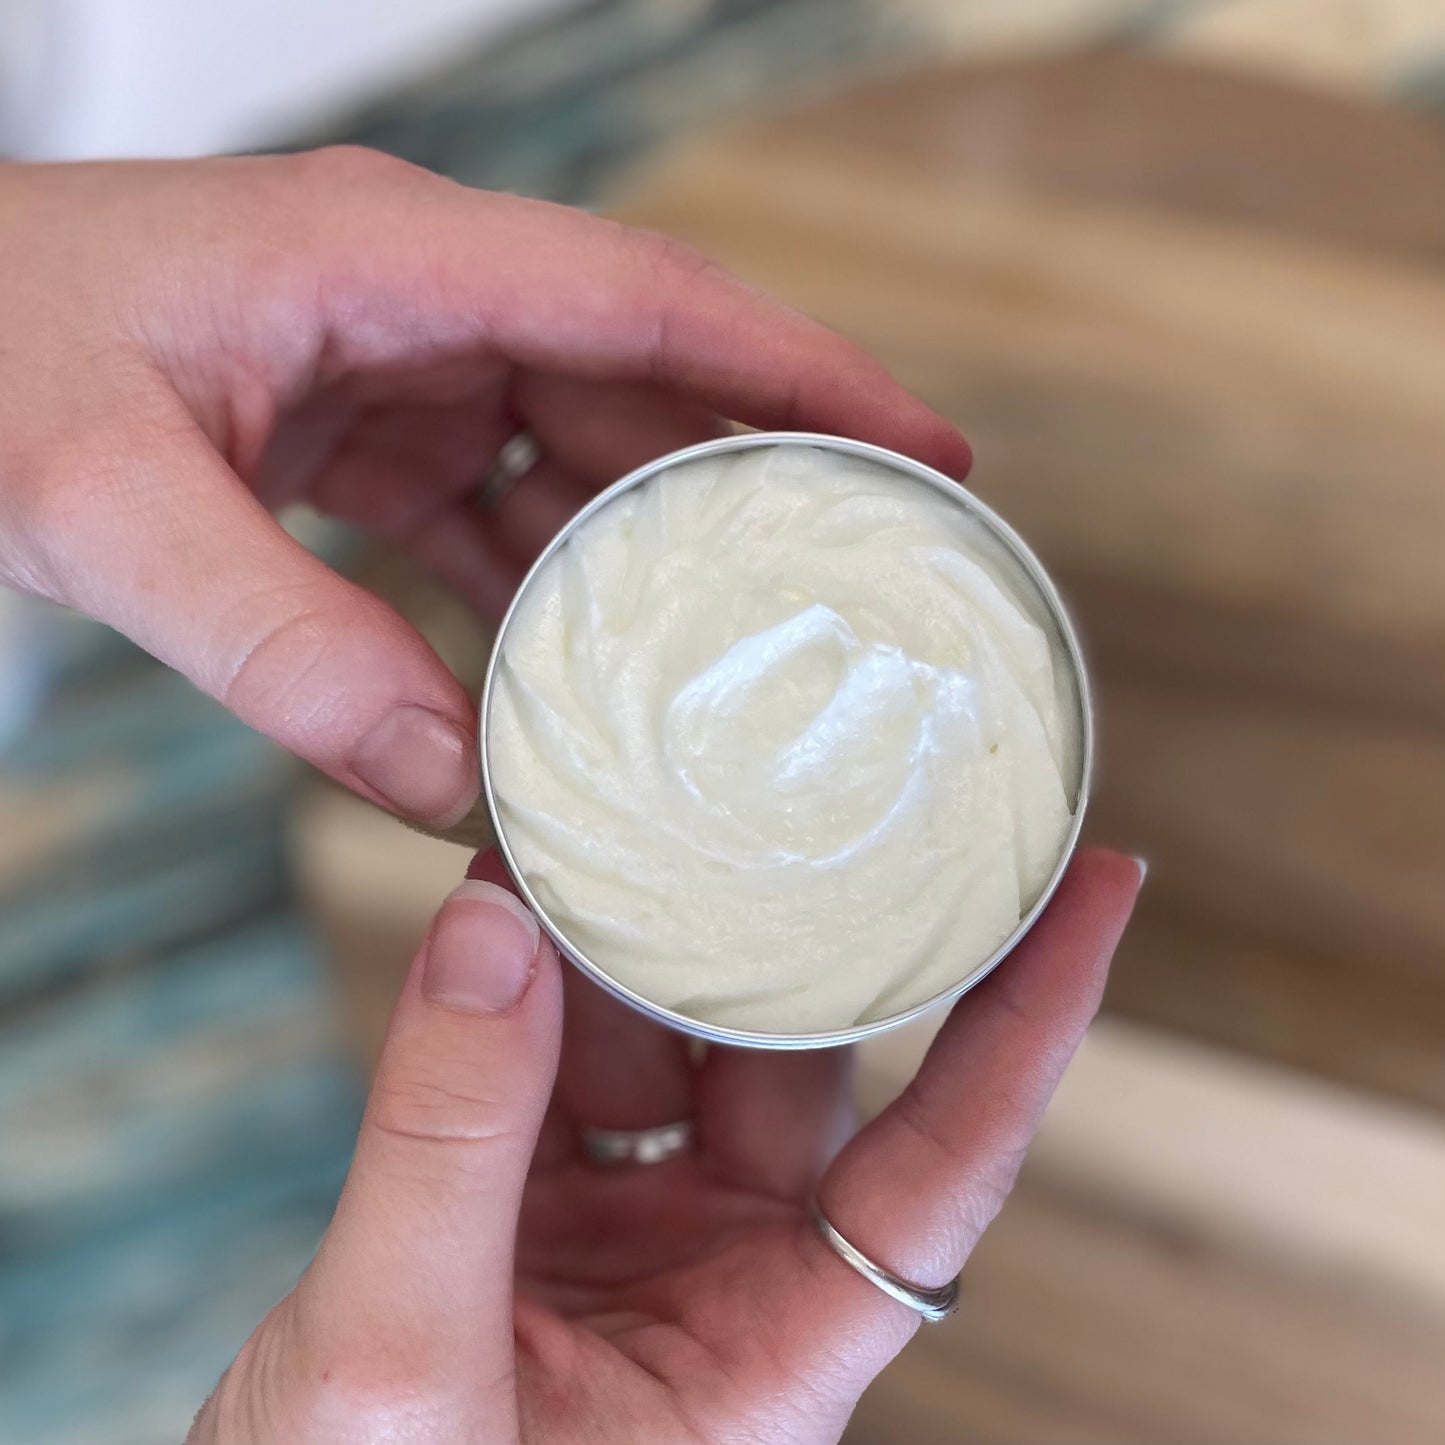 Whipped Tallow Skin Cream with Raw Honey | All Natural Moisturizer and Body Butter | Made with Local Ingredients | Aluminum Container